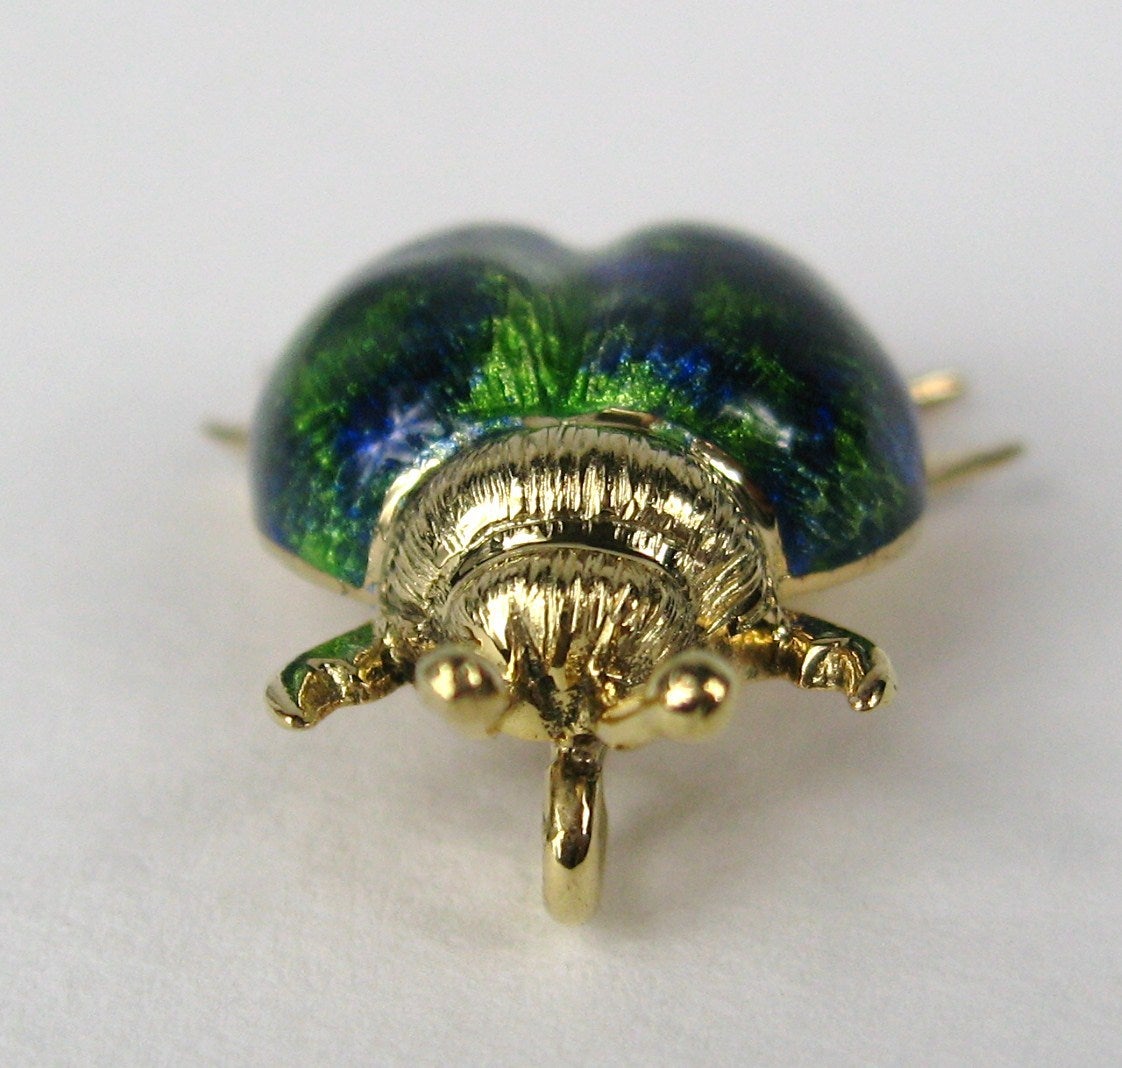 Wonderful green and blue enameling  on this beetle pendant. Made up of 14K gold. Measures 1